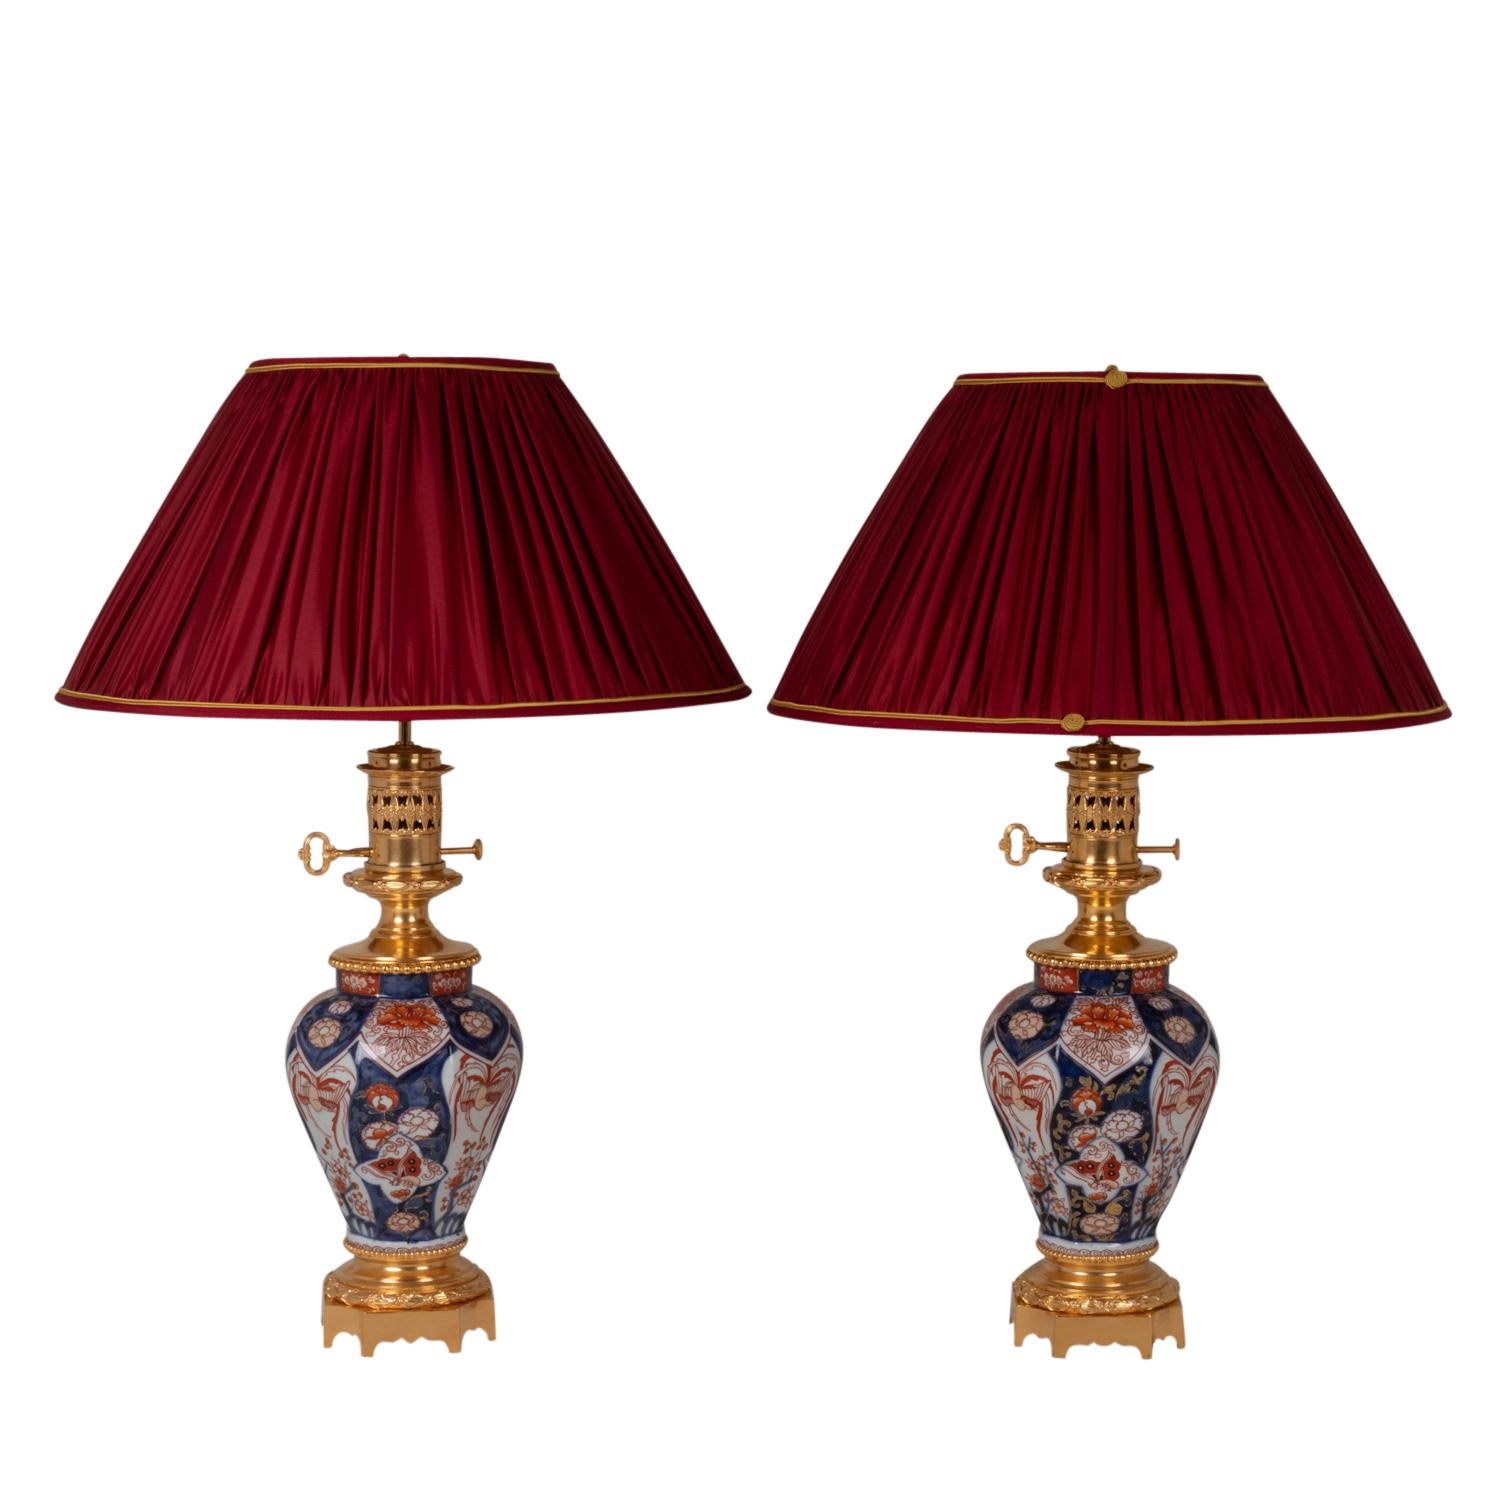 Pair of lamps in Imari porcelain and bronze, adorned with flowers and leaves, in shades of cobalt blue, saffron red and porcelain white. Square base with four concave angles. Top of the frame with pearl decoration and a key.

French work realized